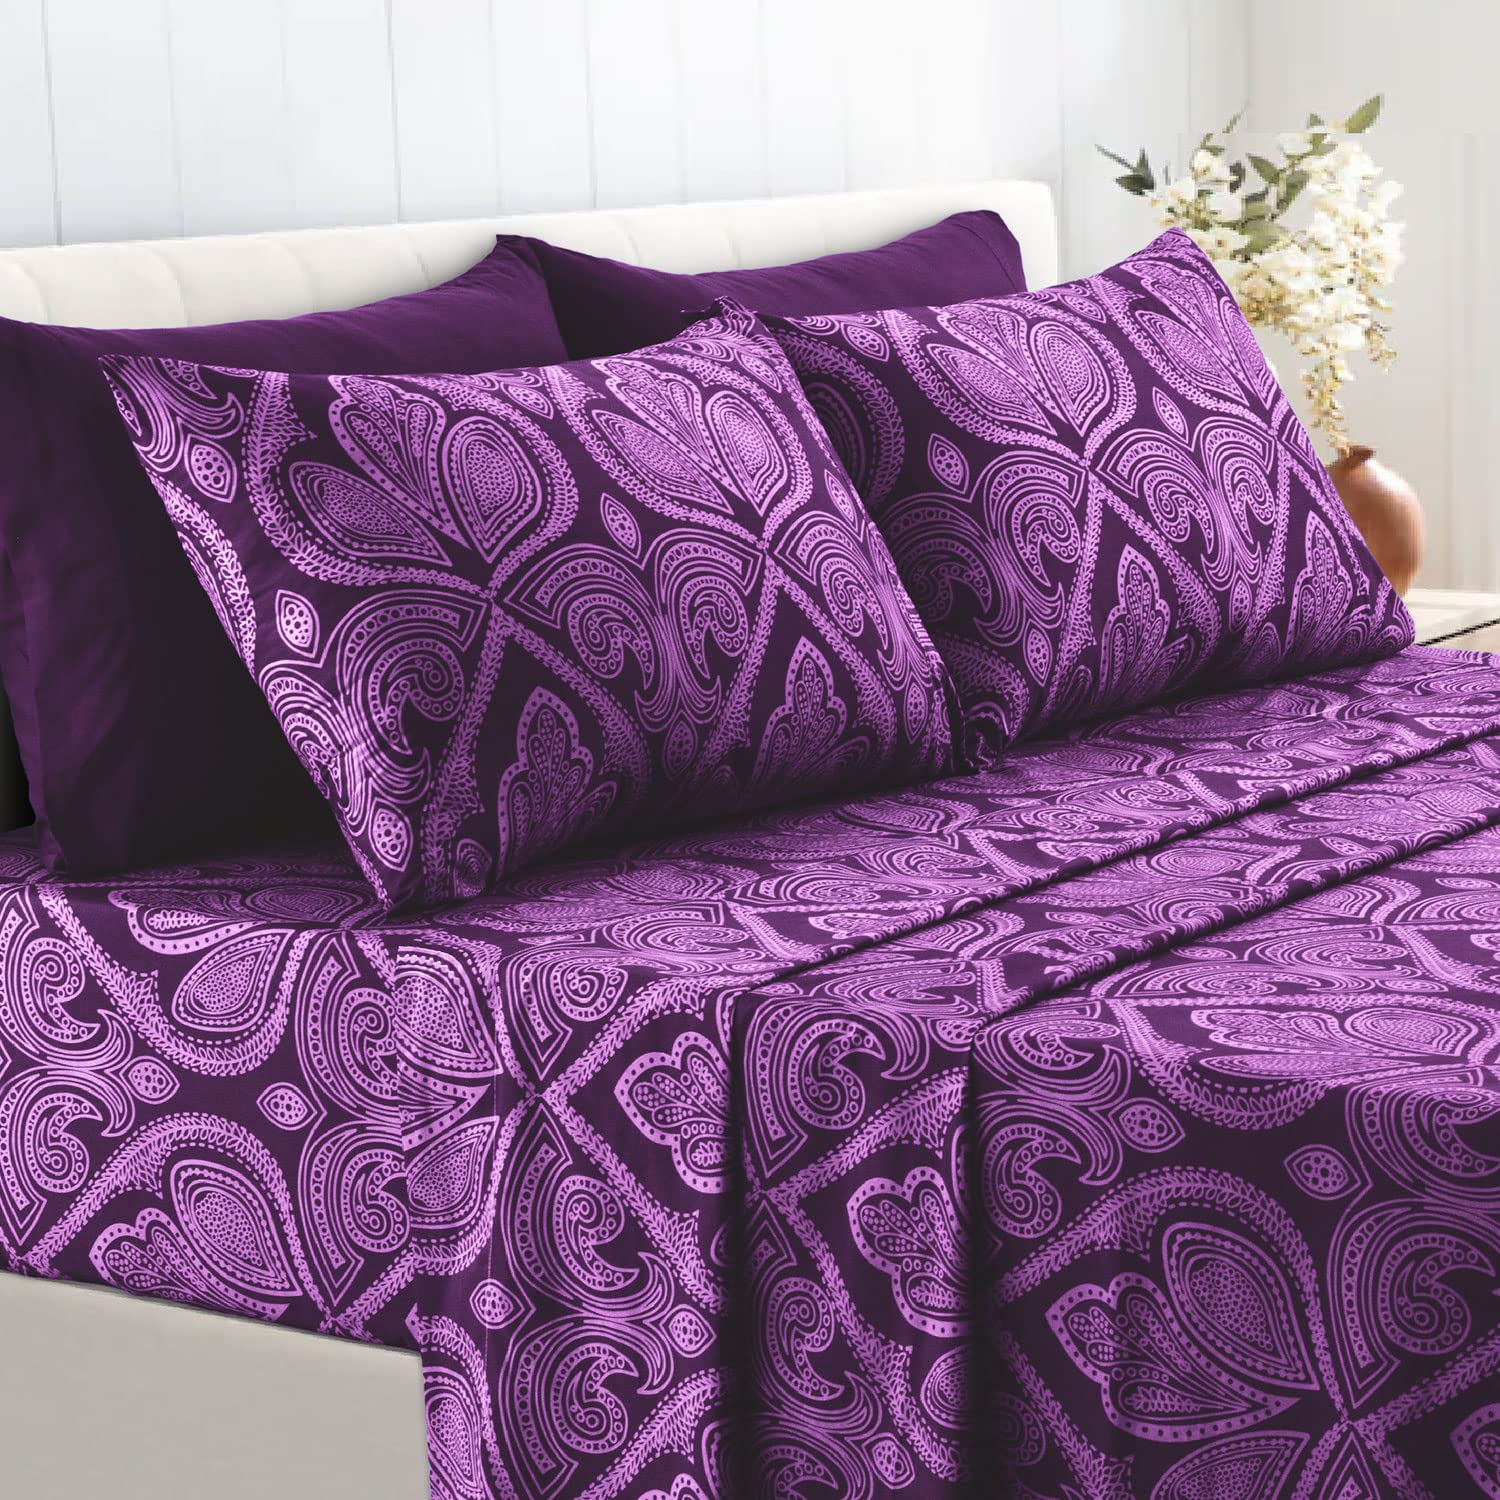 Book Cover Lux Decor Collection Bed Sheets - 6 Pc King Size Sheets - 1800 Thread Count Brushed Microfiber Sheets - 16 Inches Deep Pocket Bedding Sheets & Pillowcases (King, Paisley Purple) Paisley Purple King